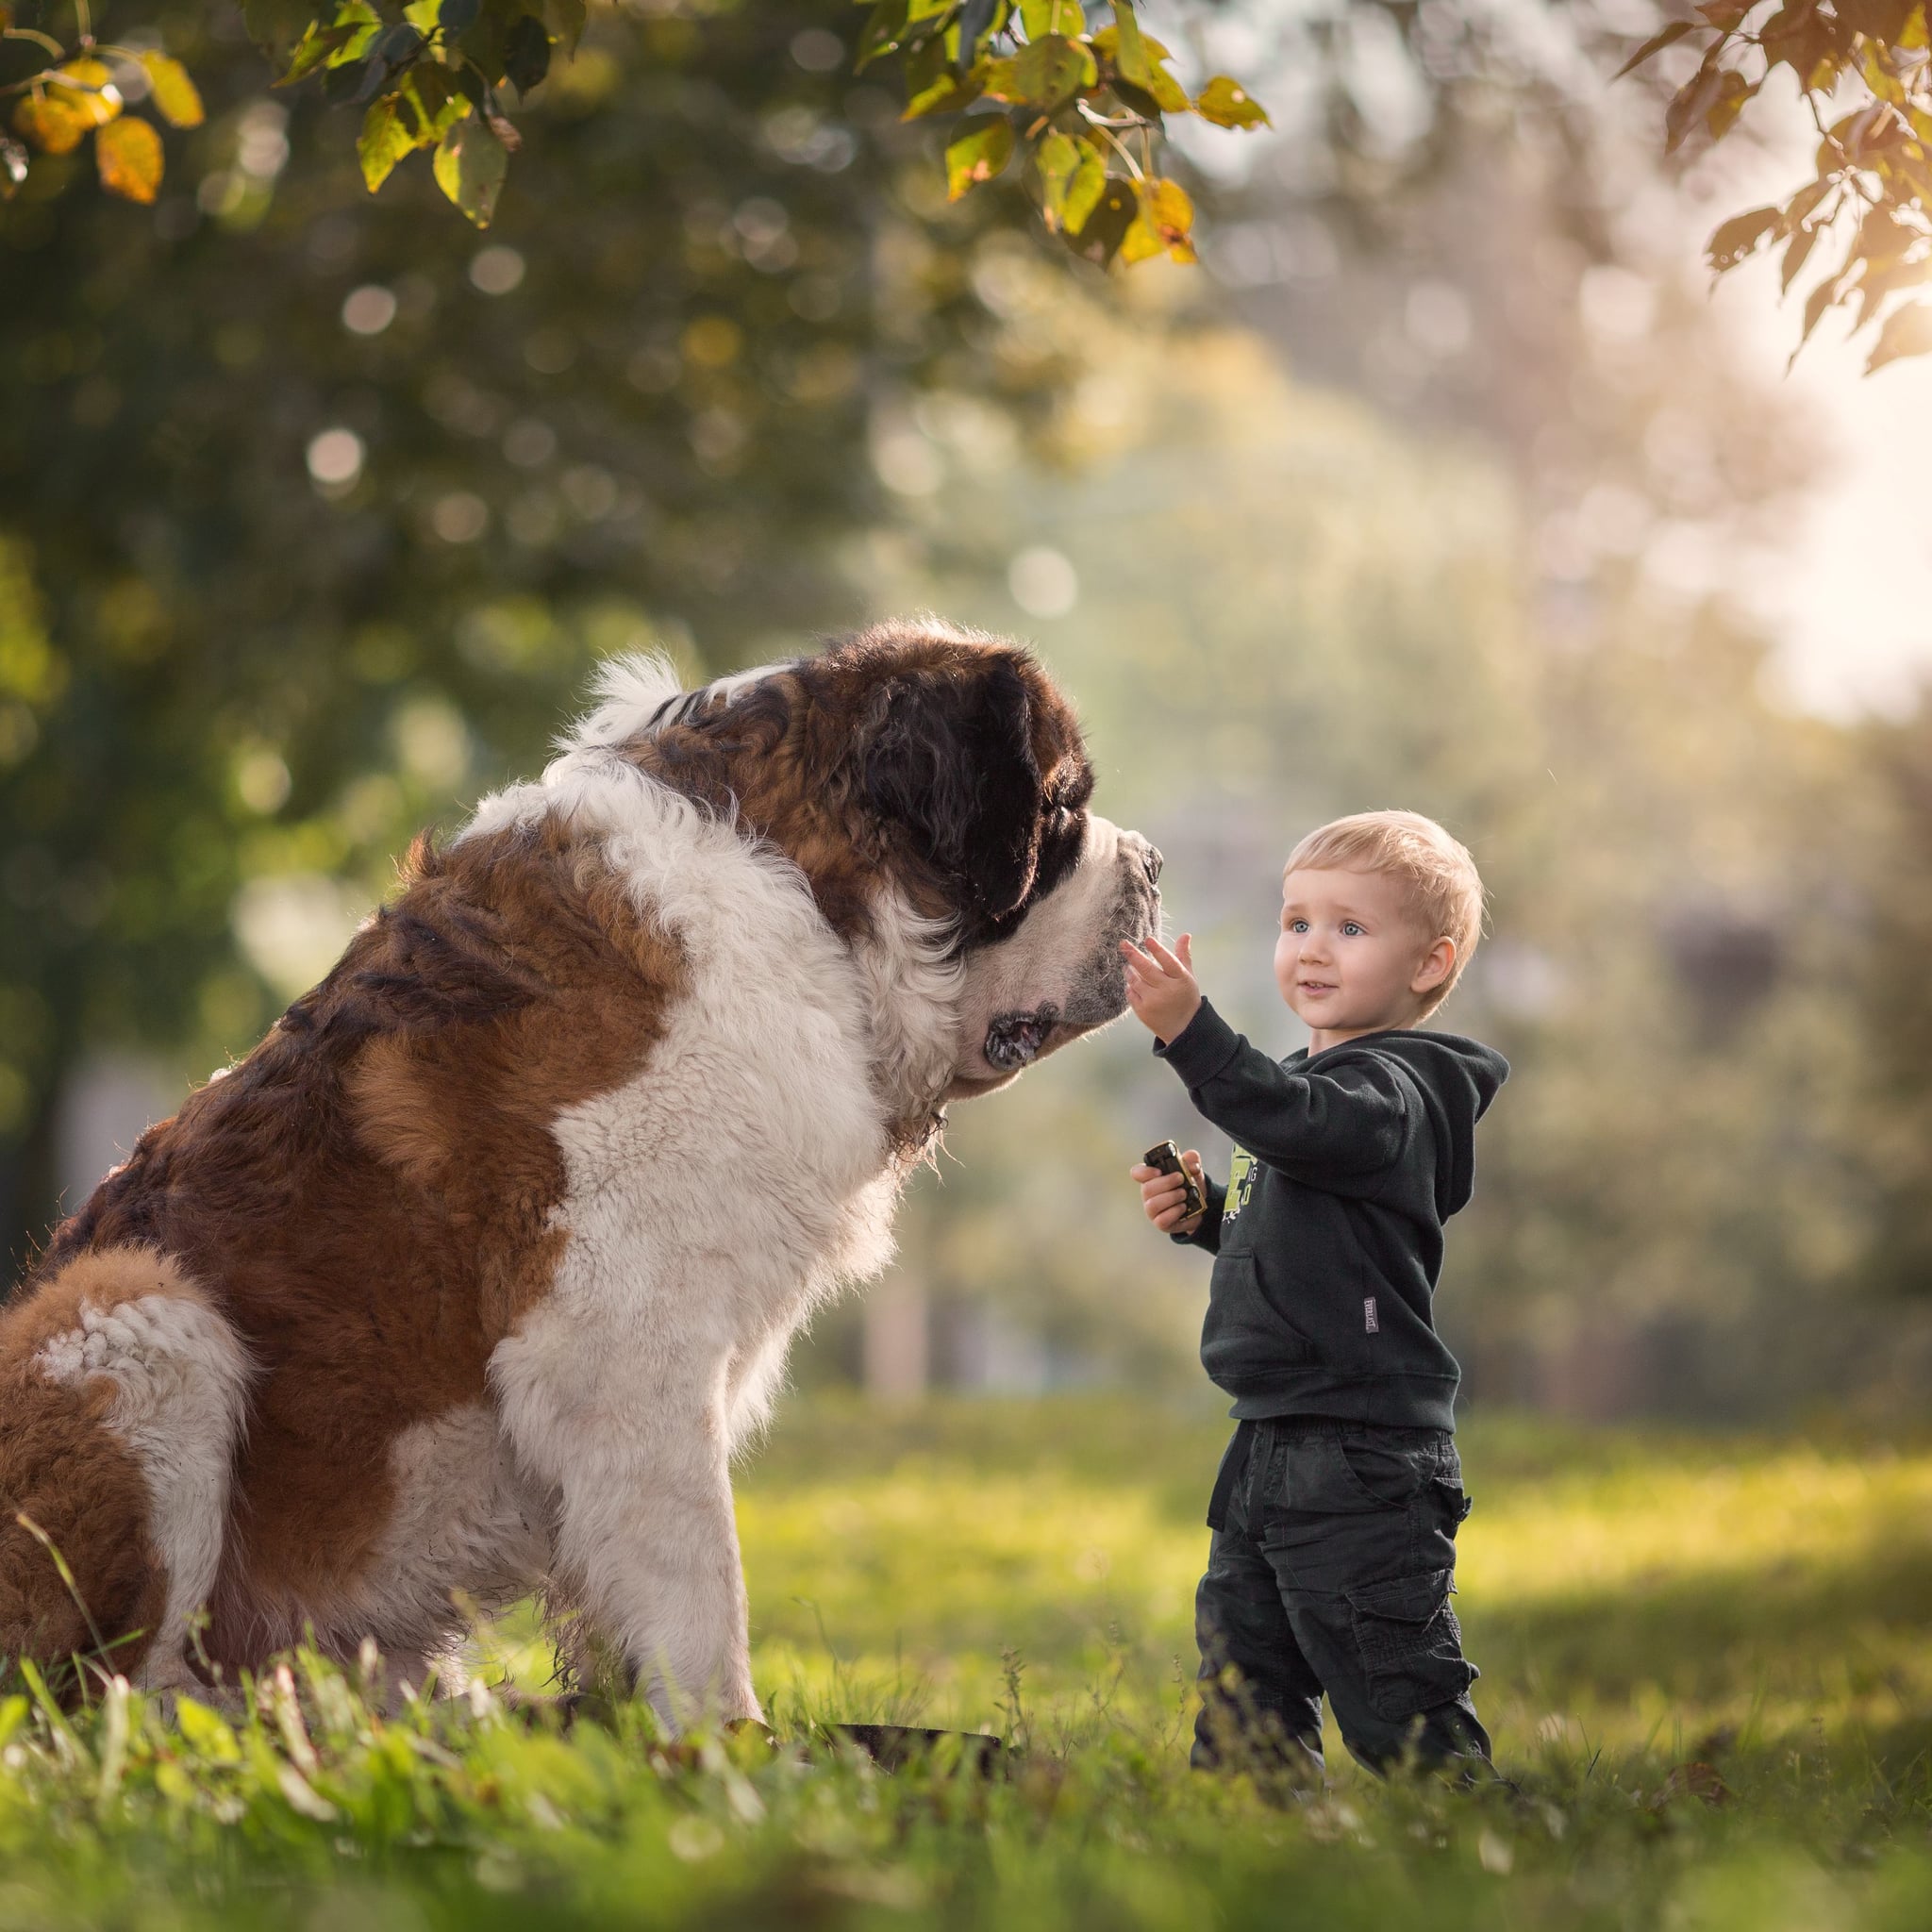 Photo Series on Big Dogs and Little Kids | POPSUGAR Family